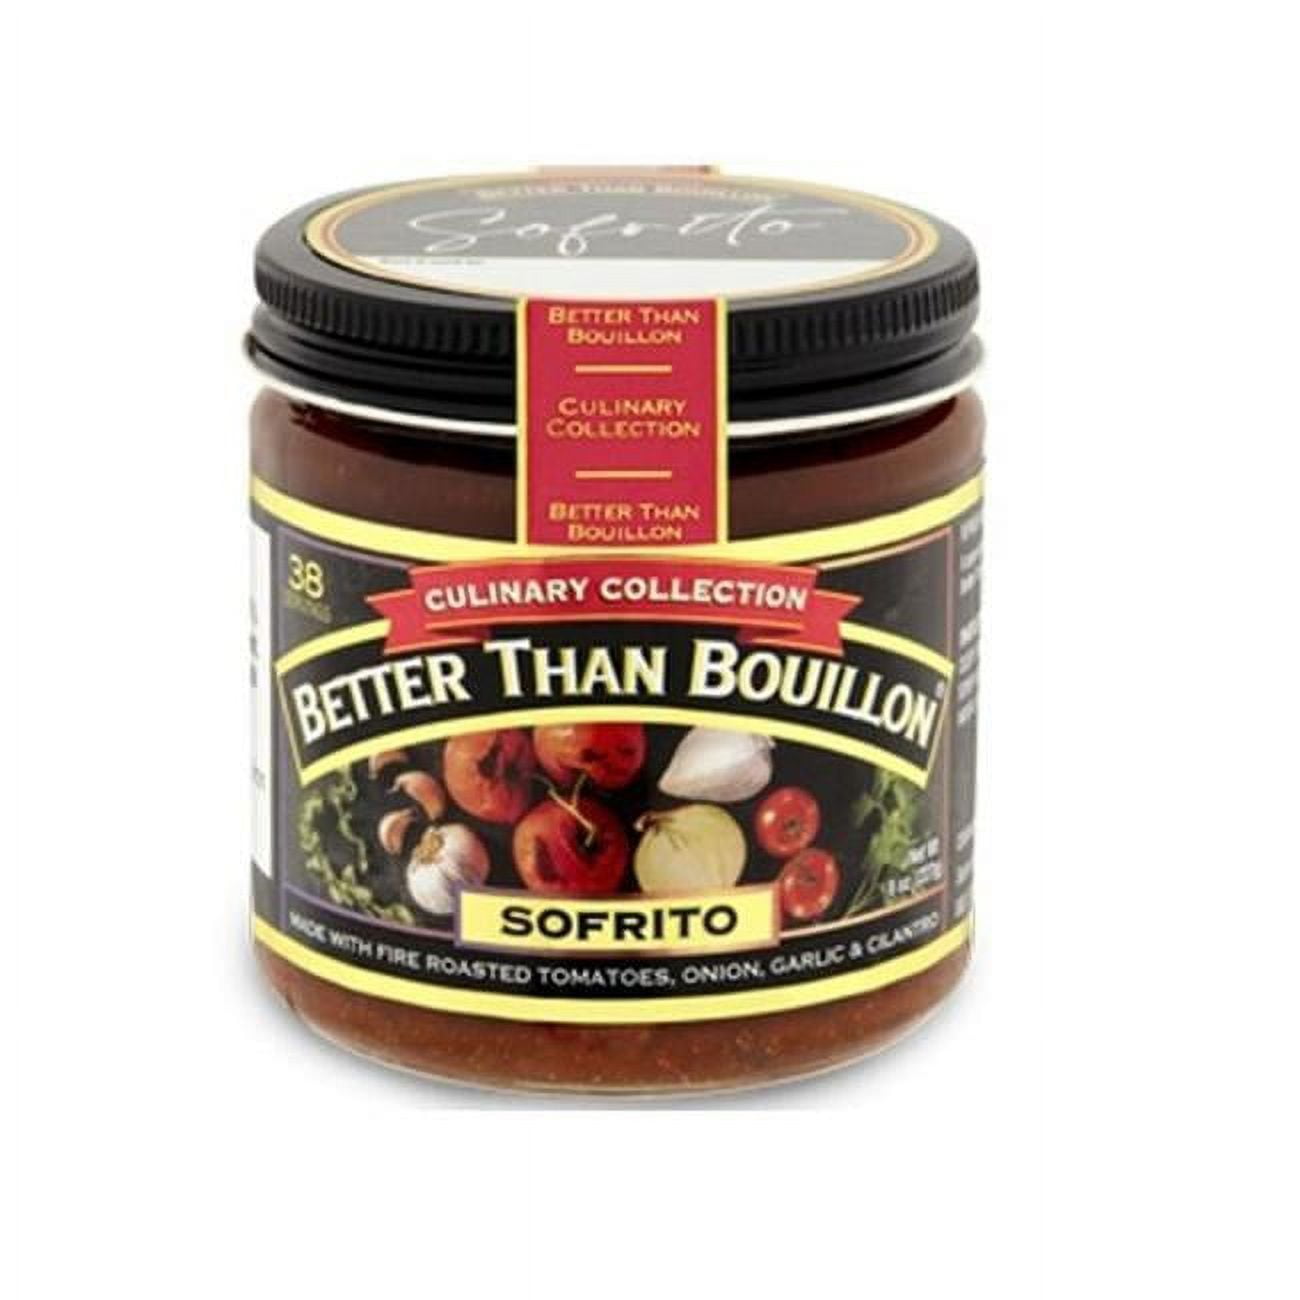 Better Than Bouillon Culinary Collection Sofrito Base Soup 8 oz Jar